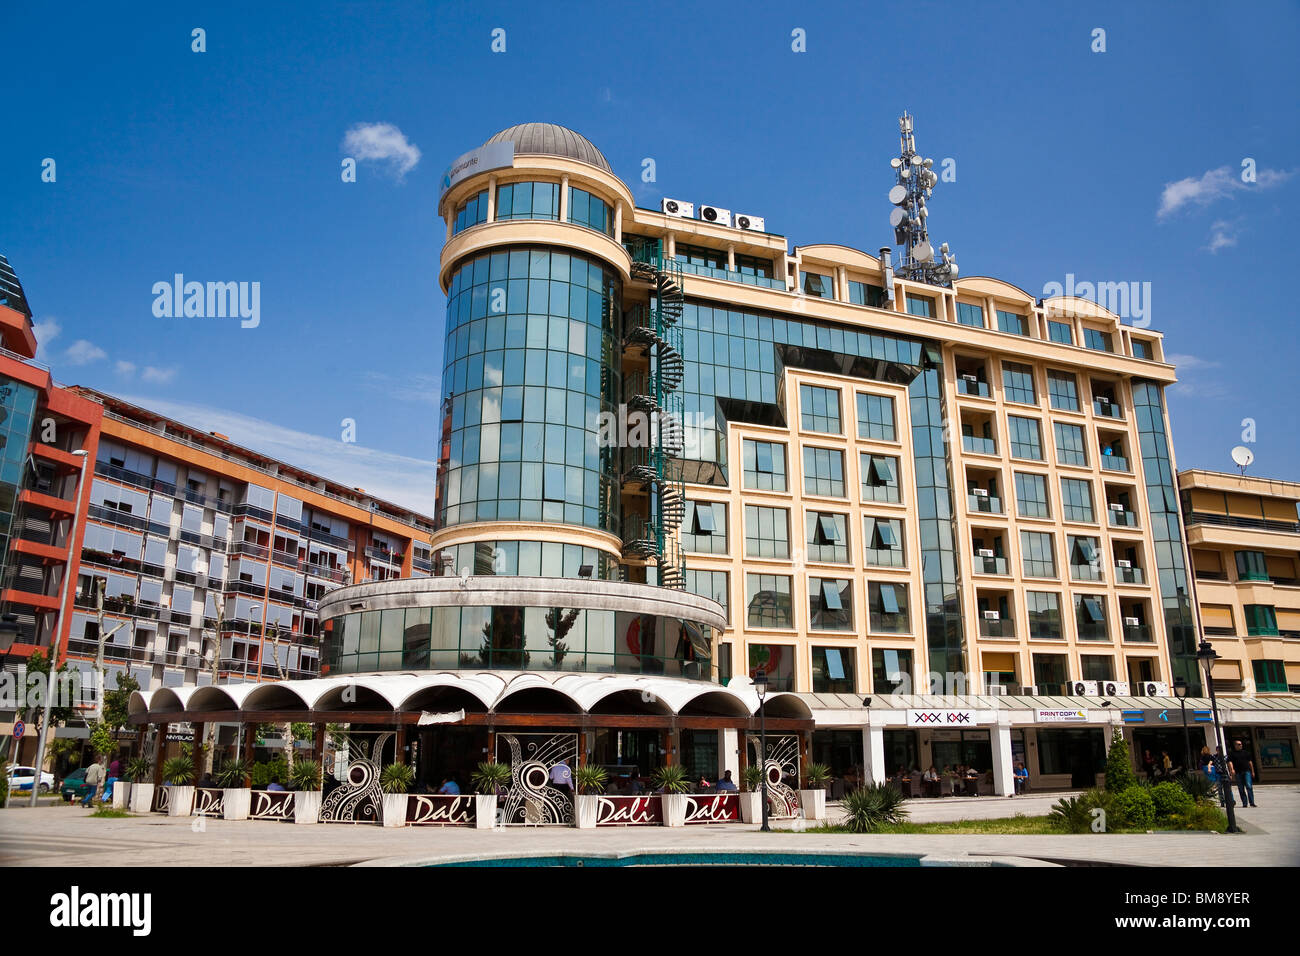 passion-for-luxury-montenegro-the-new-beauty-of-the-balkans